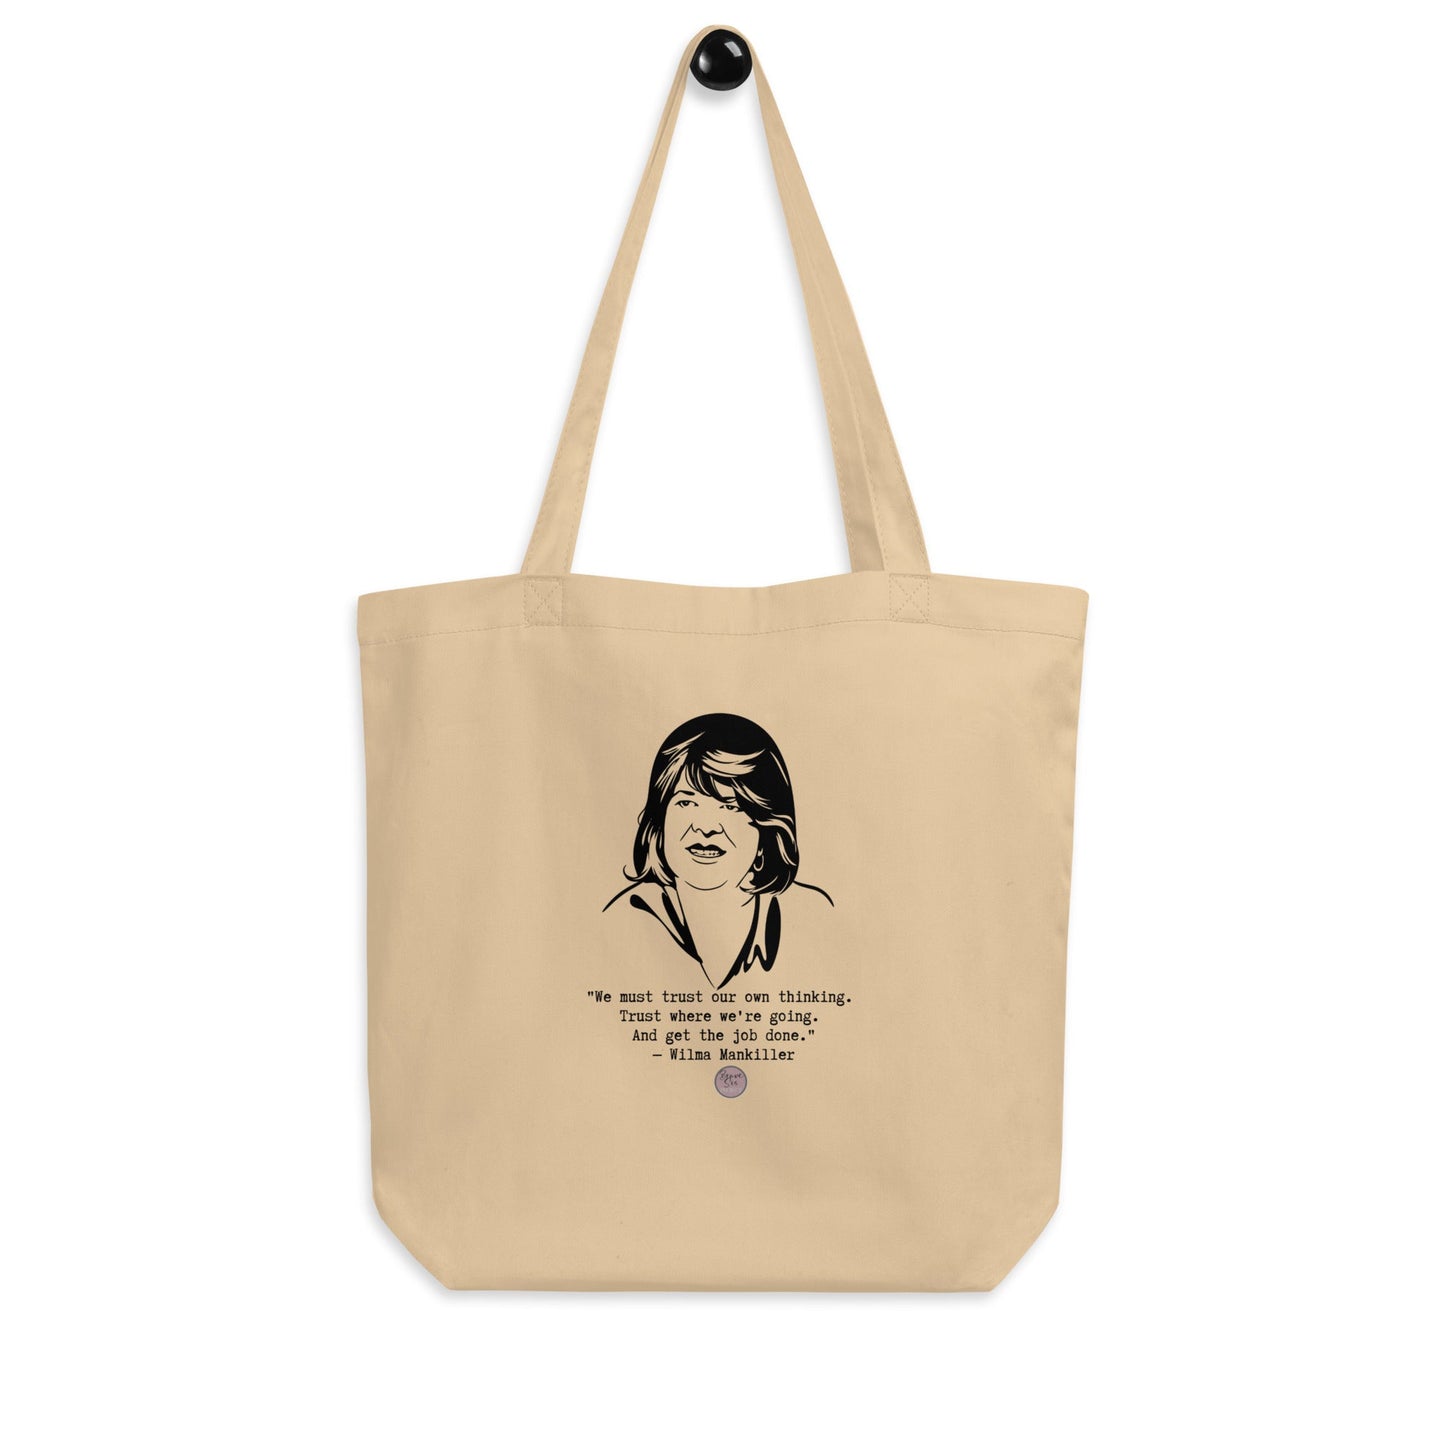 Wilma Mankiller "We Must Trust Our Own Thinking" Eco Tote Bag